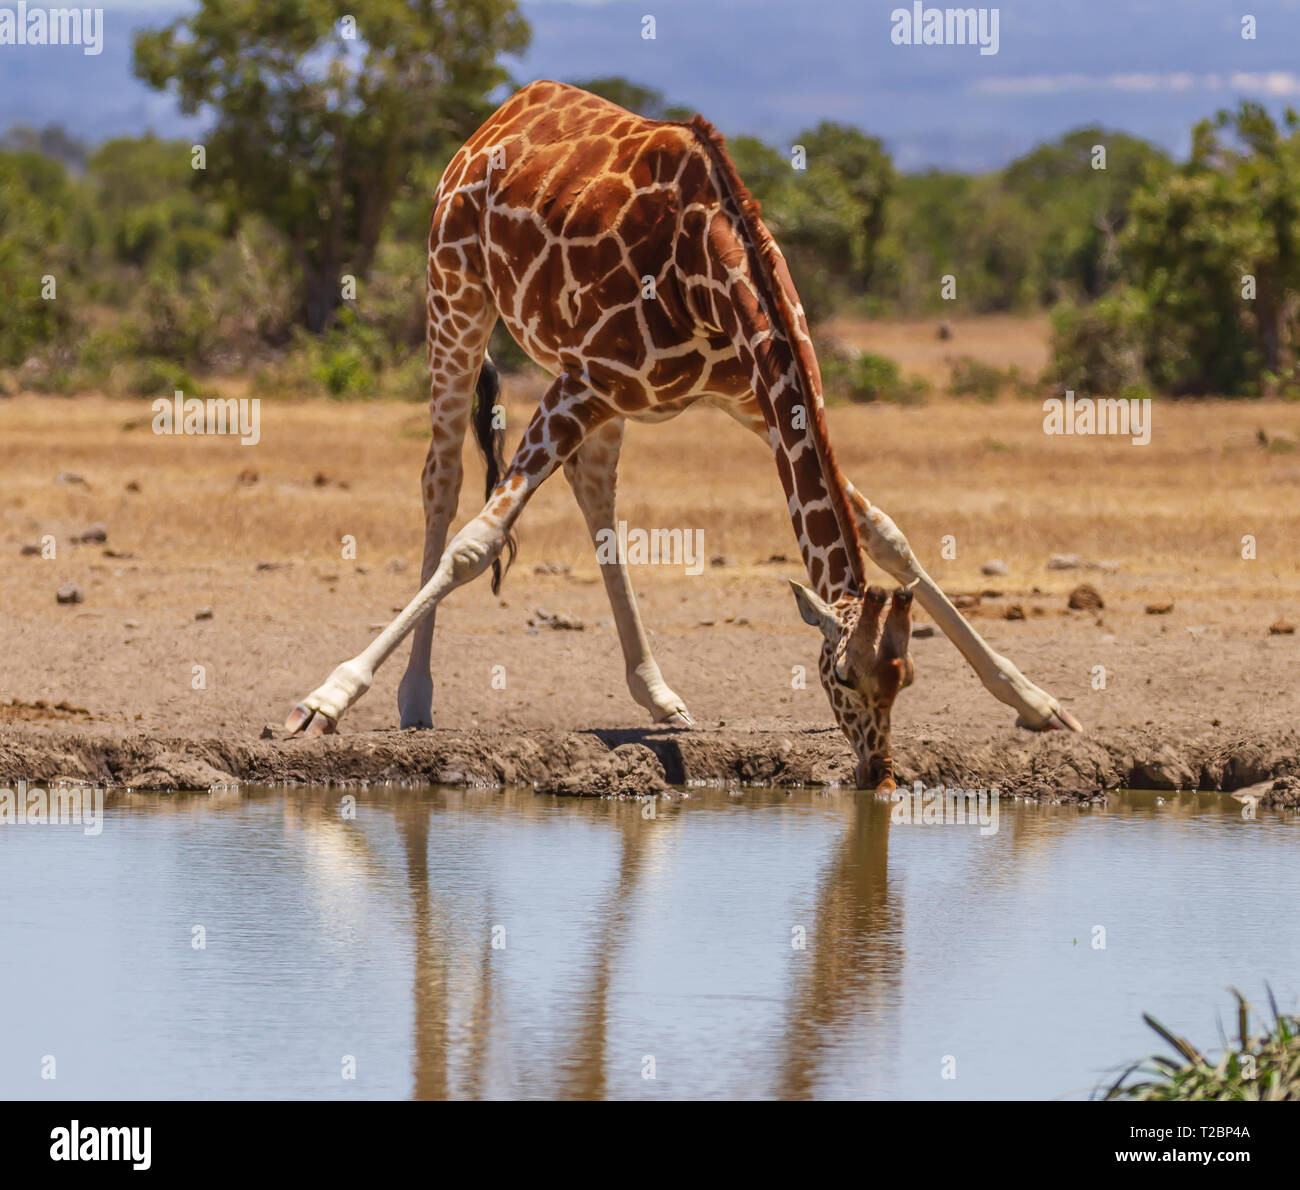 Reticulated giraffe, Giraffa camelopardalis reticulata, stretches legs and neck to drink water from waterhole. Ol Pejeta Conservancy, Kenya, Africa Stock Photo